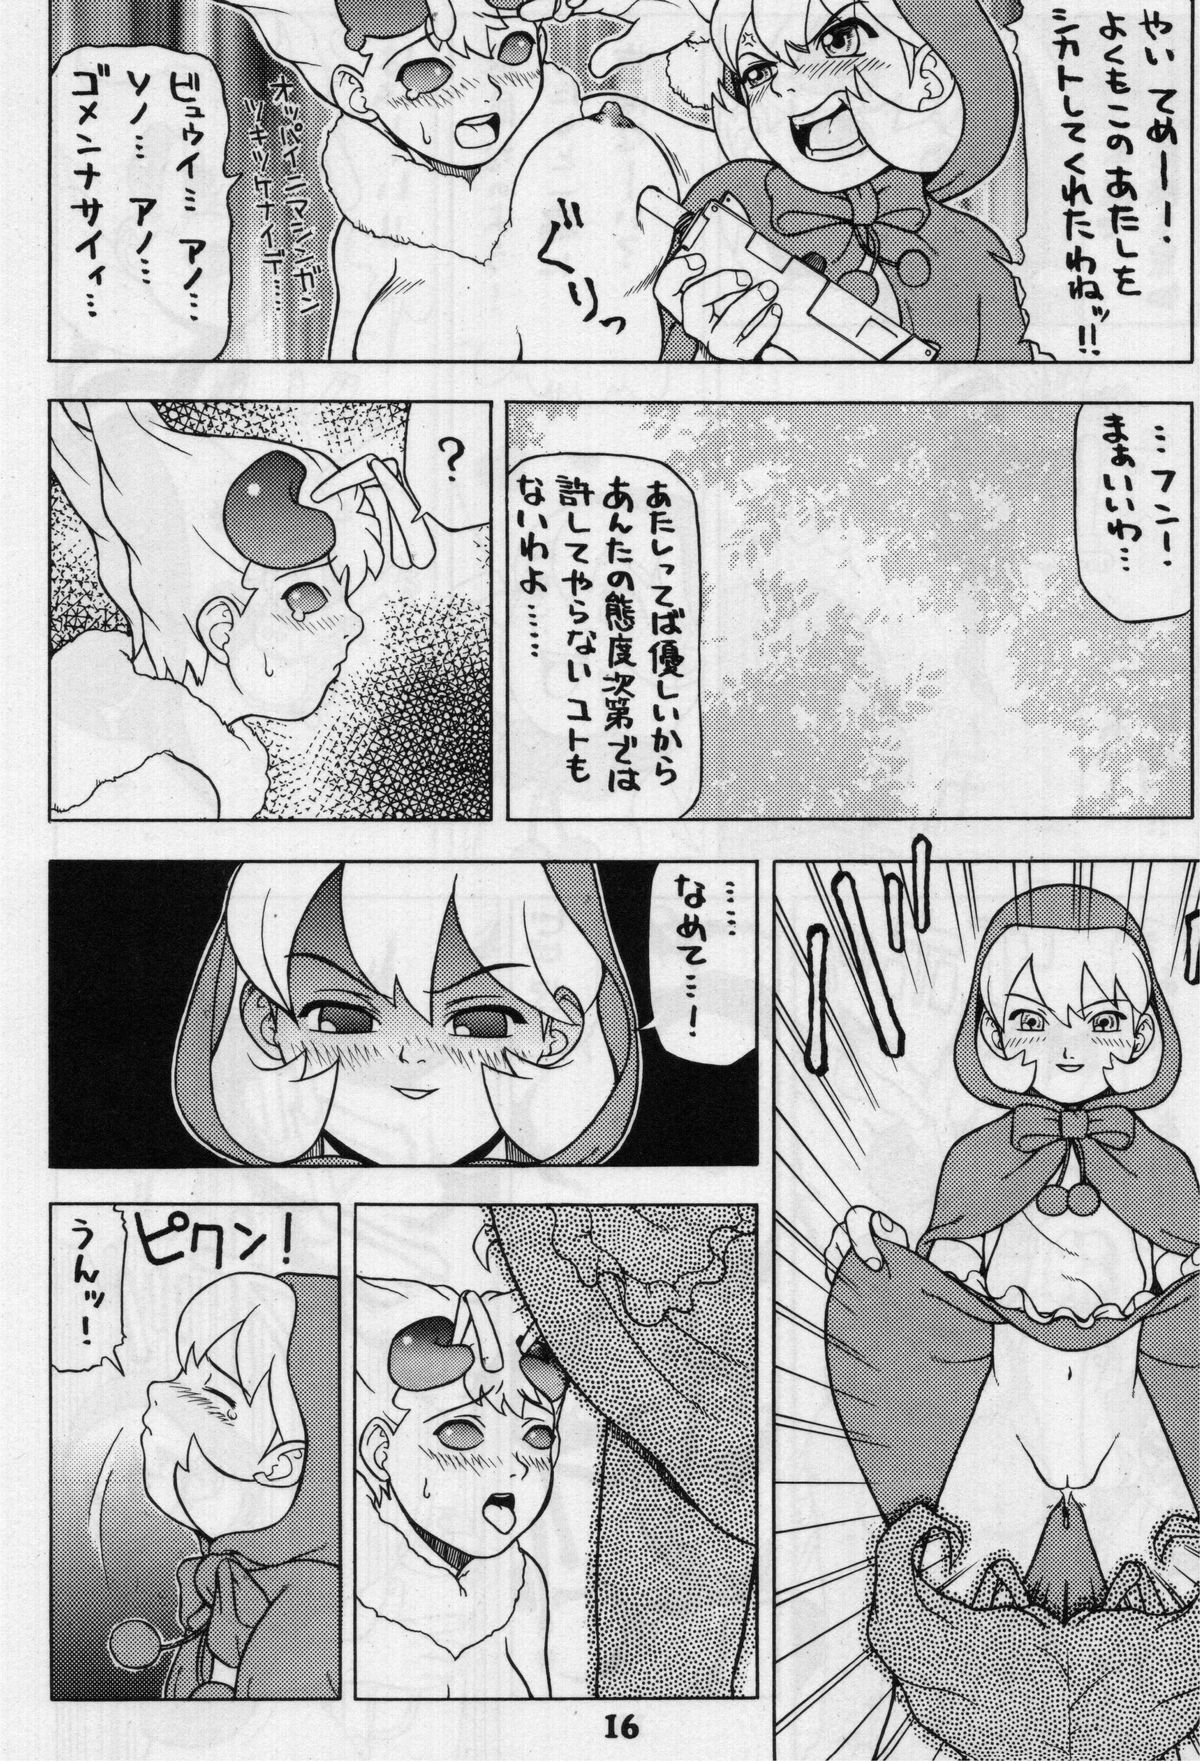 (C52) [MOON'S CLIQUE (Various)] LOVE DELUXE (Darkstalkers) page 15 full